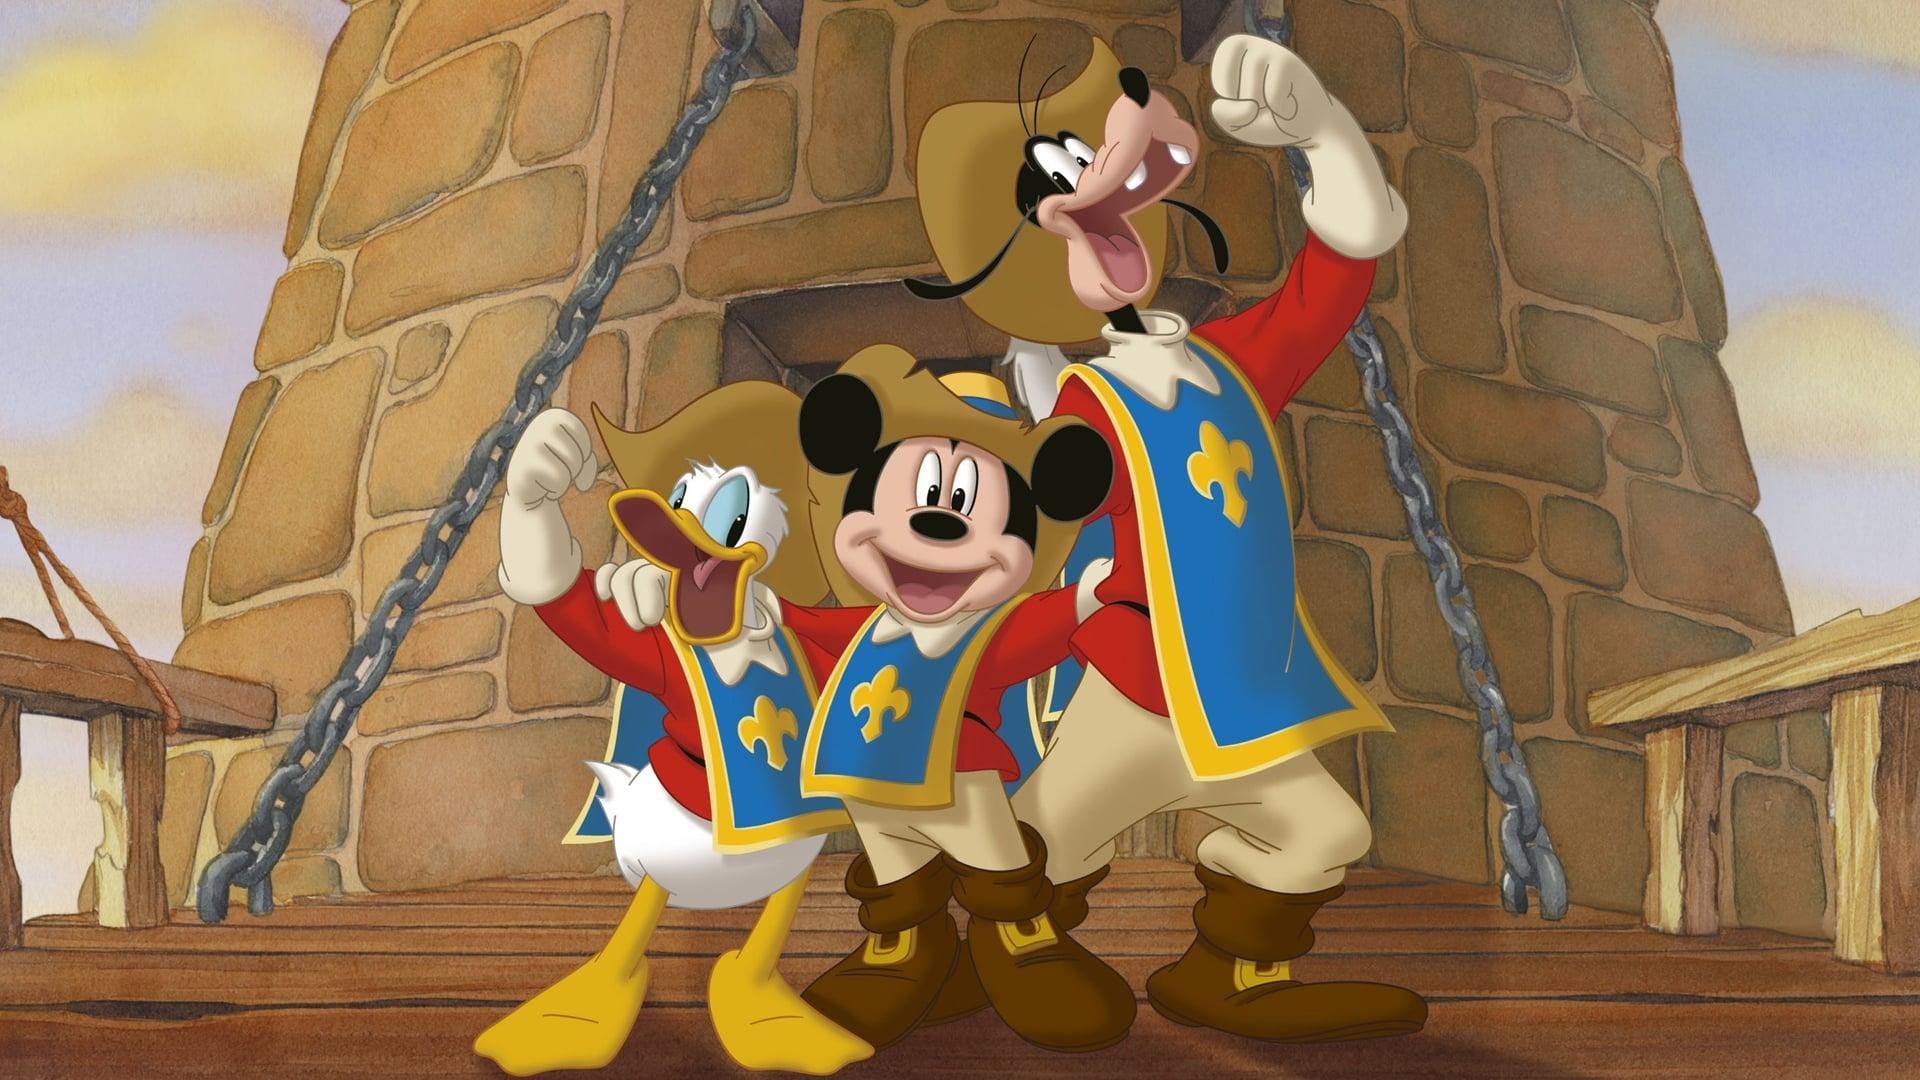 Mickey, Donald, Goofy: The Three Musketeers backdrop